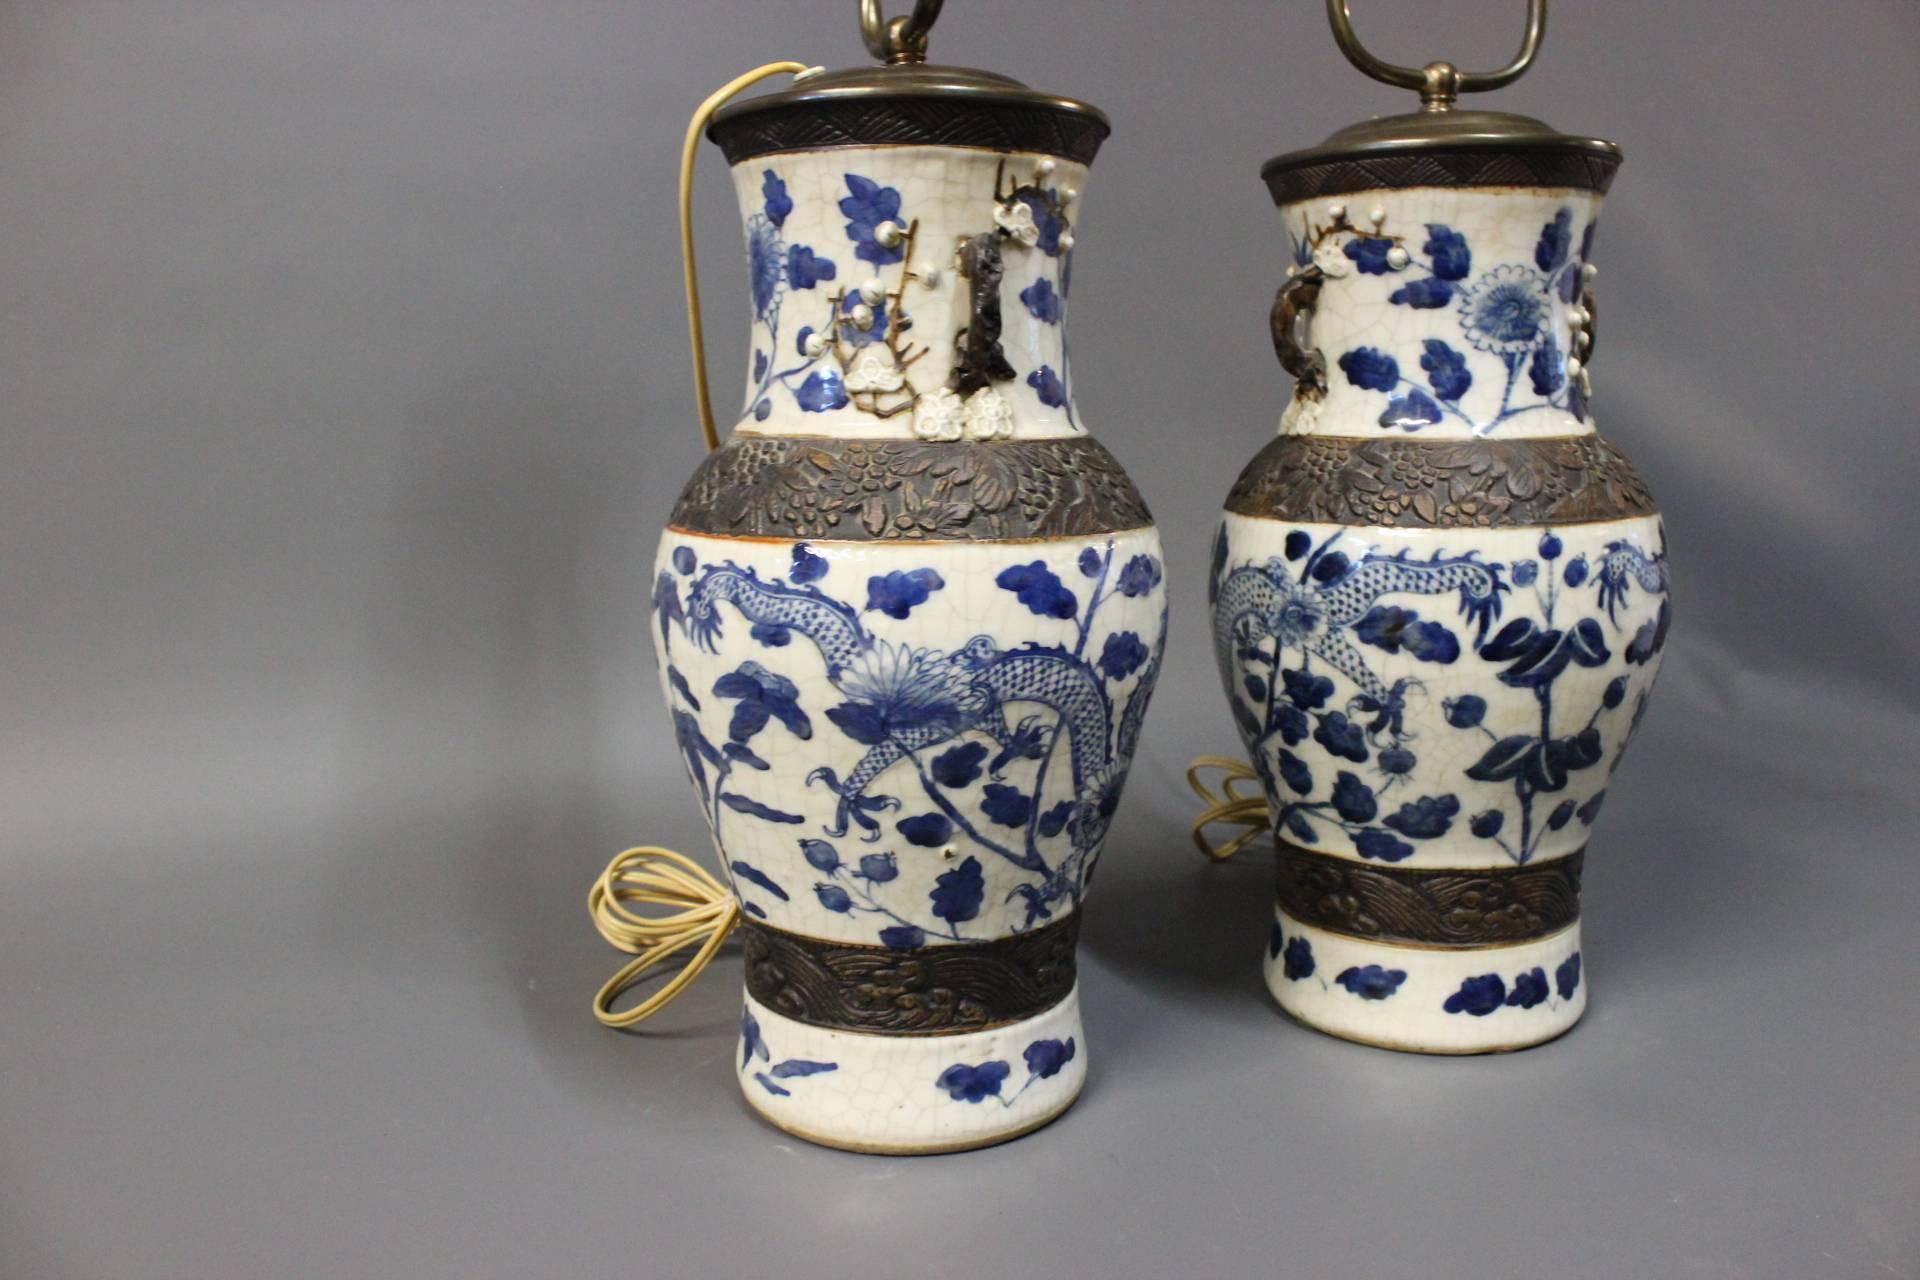 A pair of Chineese porcelain table lamps from around the 1920s. The table lamps are beautifully painted and stamped with a chinnese stamp on the bottom. 